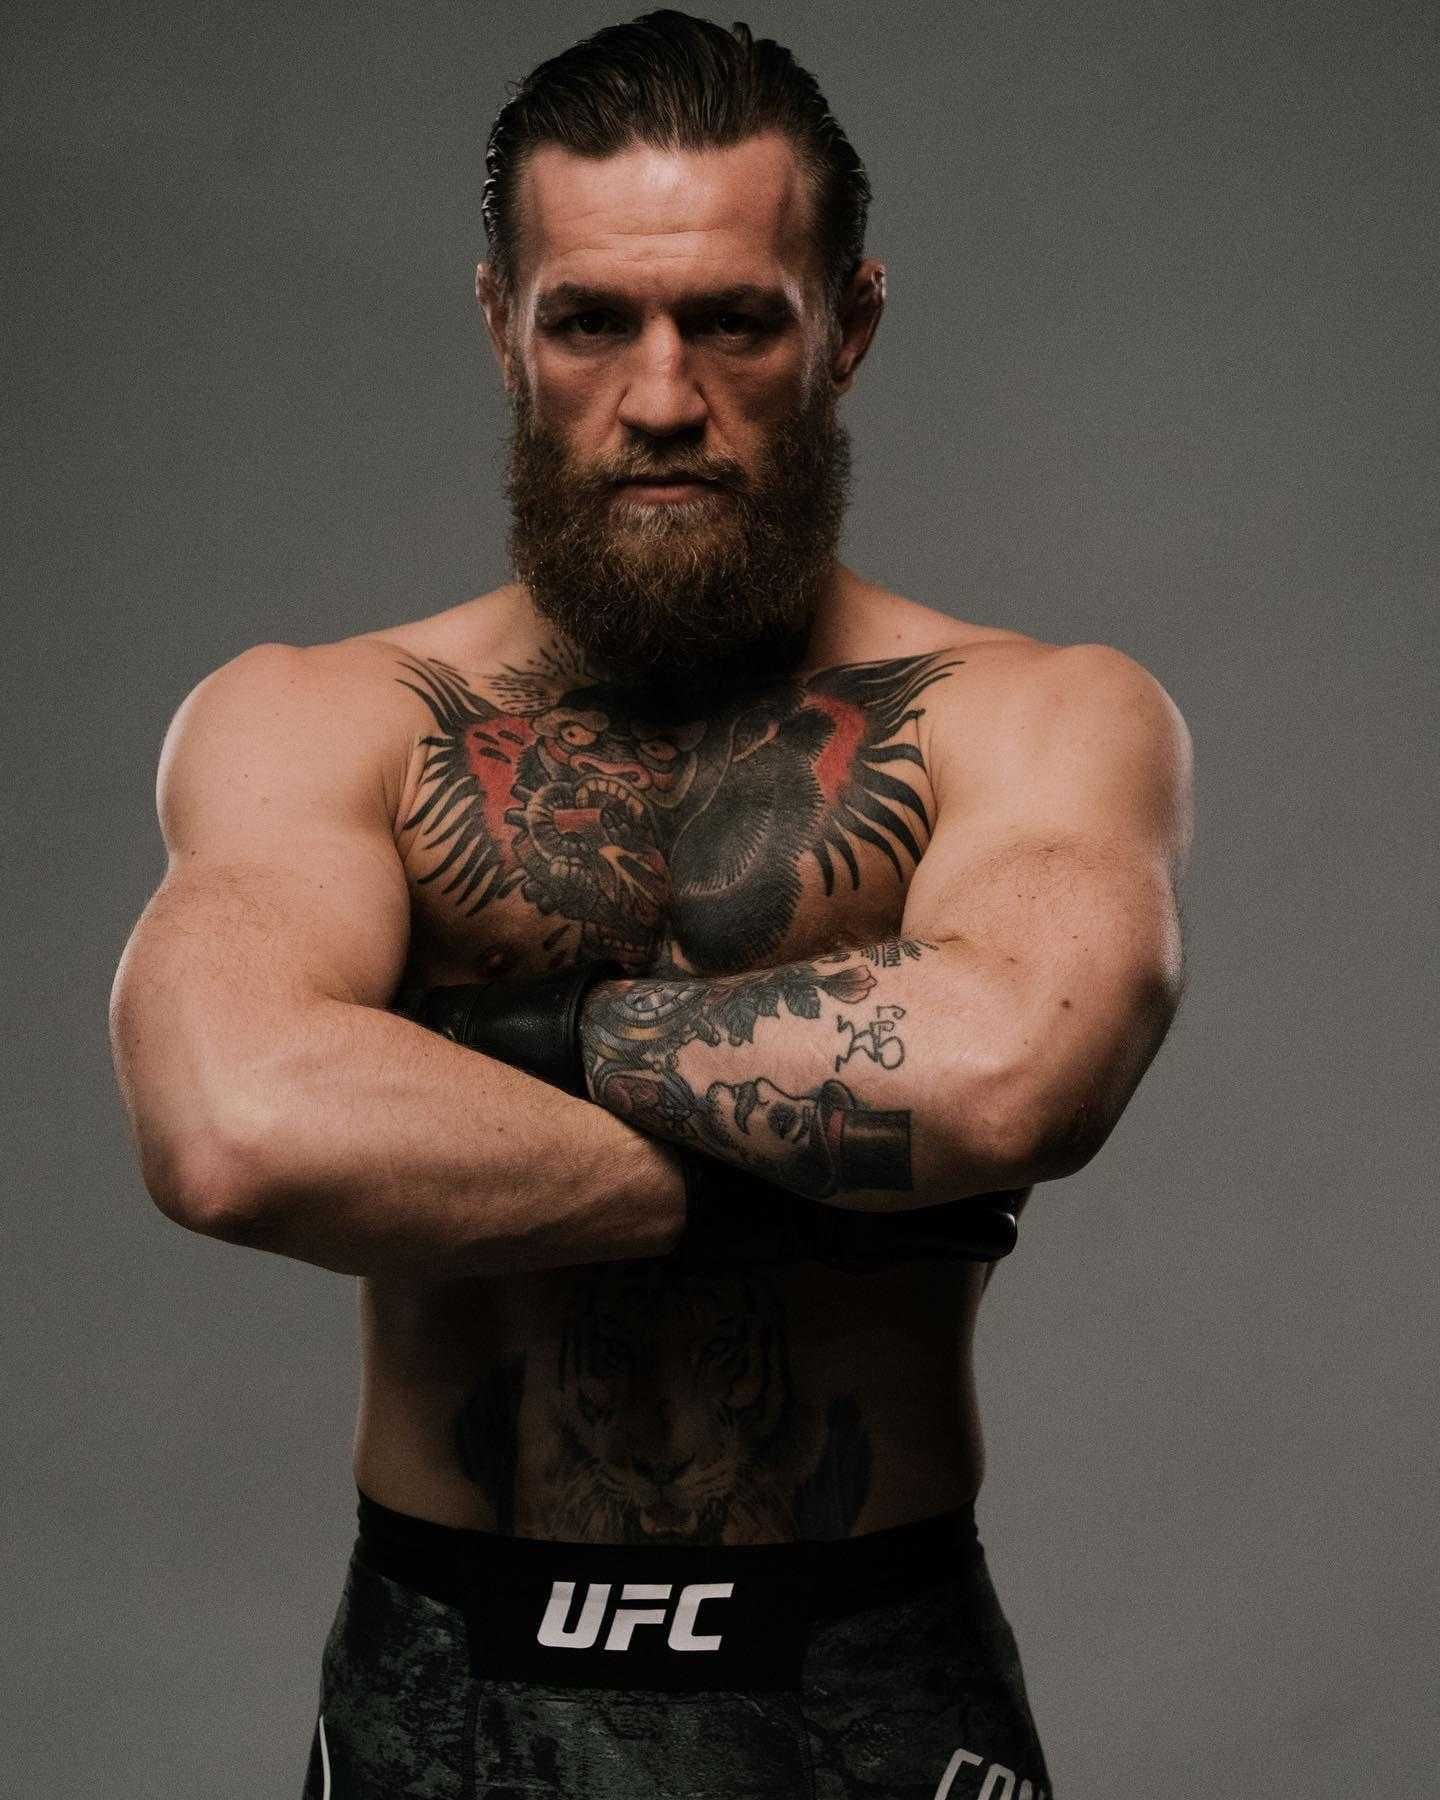 Conor McGregor Wallpaper Browse Conor McGregor Wallpaper with collections of Animated, Art, Conor M. Conor mcgregor wallpaper, Conor mcgregor, Mcgregor wallpaper